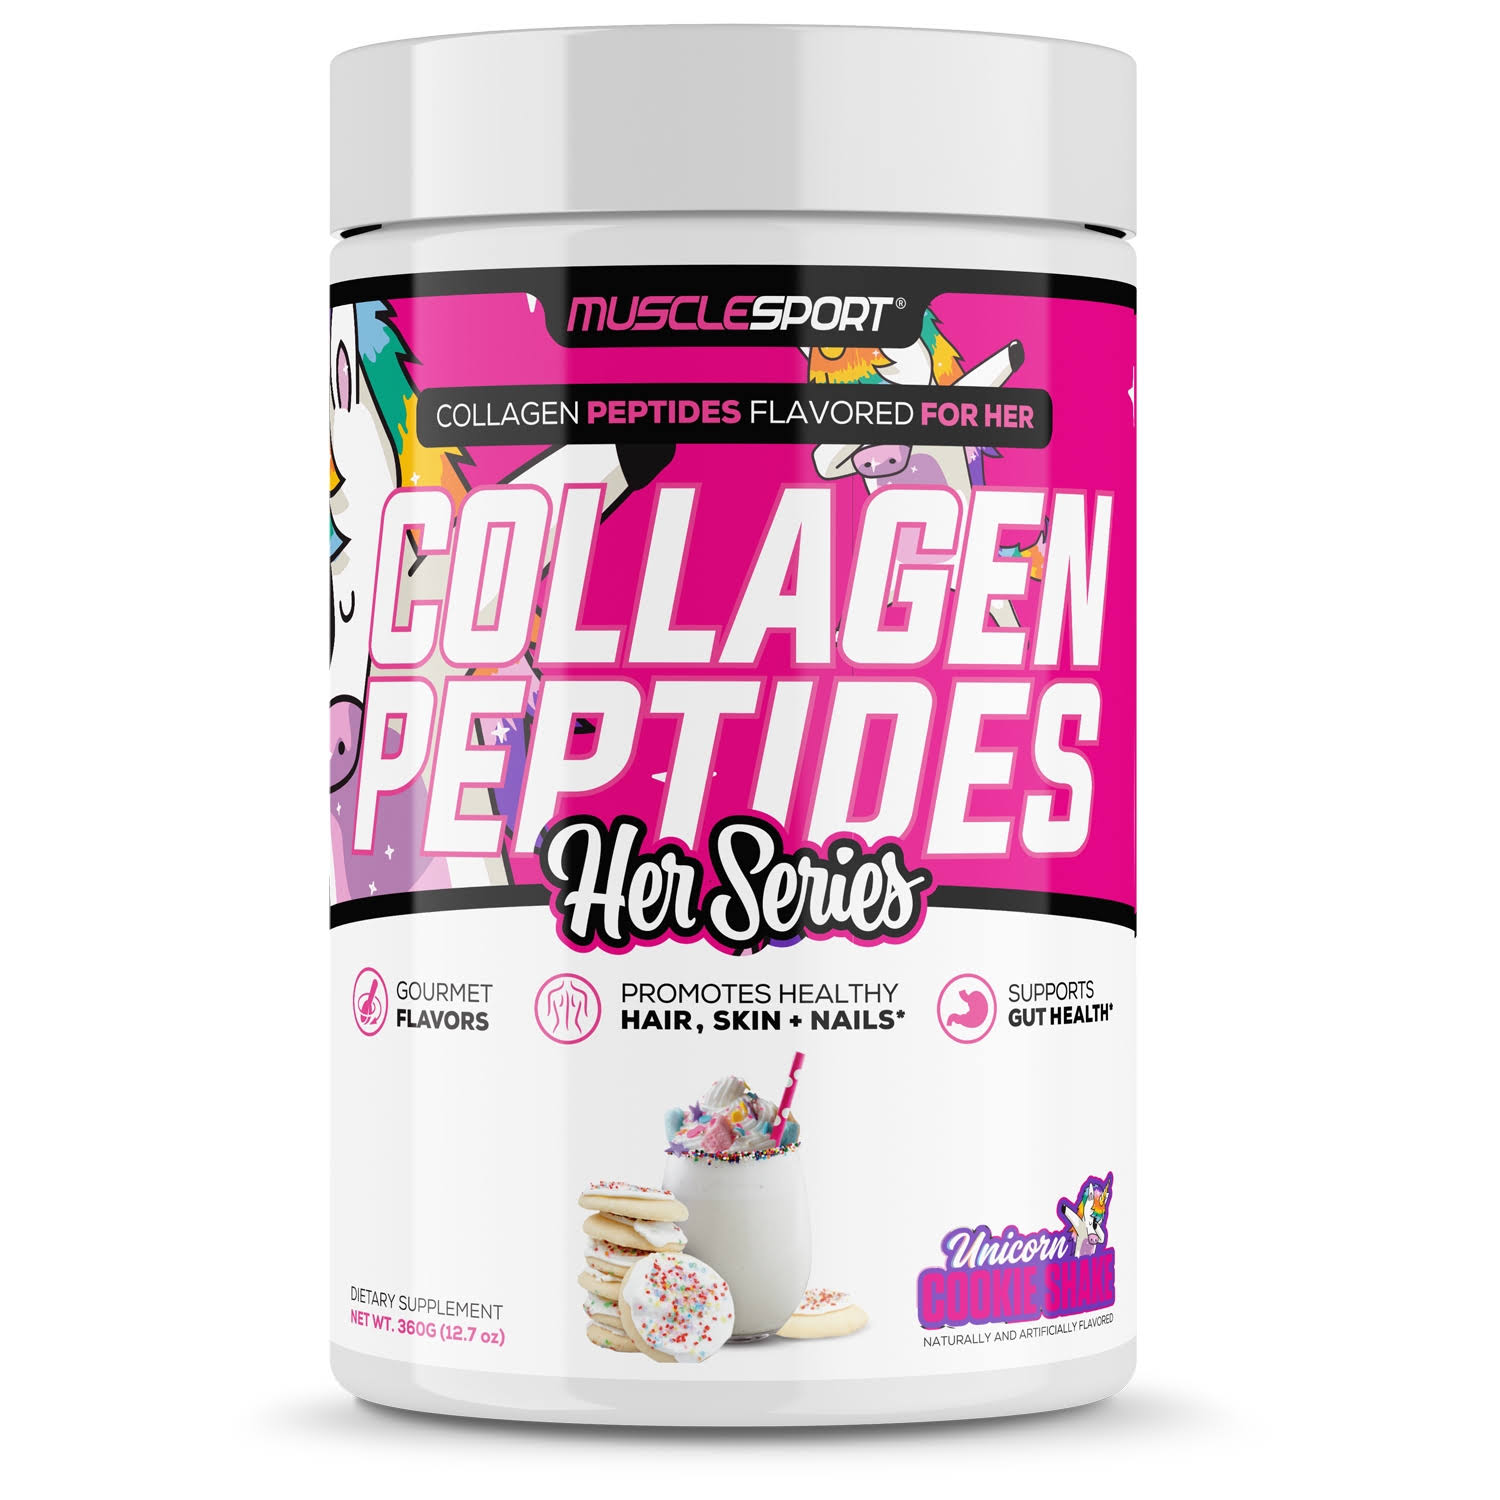 Musclesport Collagen Peptides Her Series Unicorn Cookie Shake 360g 30 Servings | by NetNutri